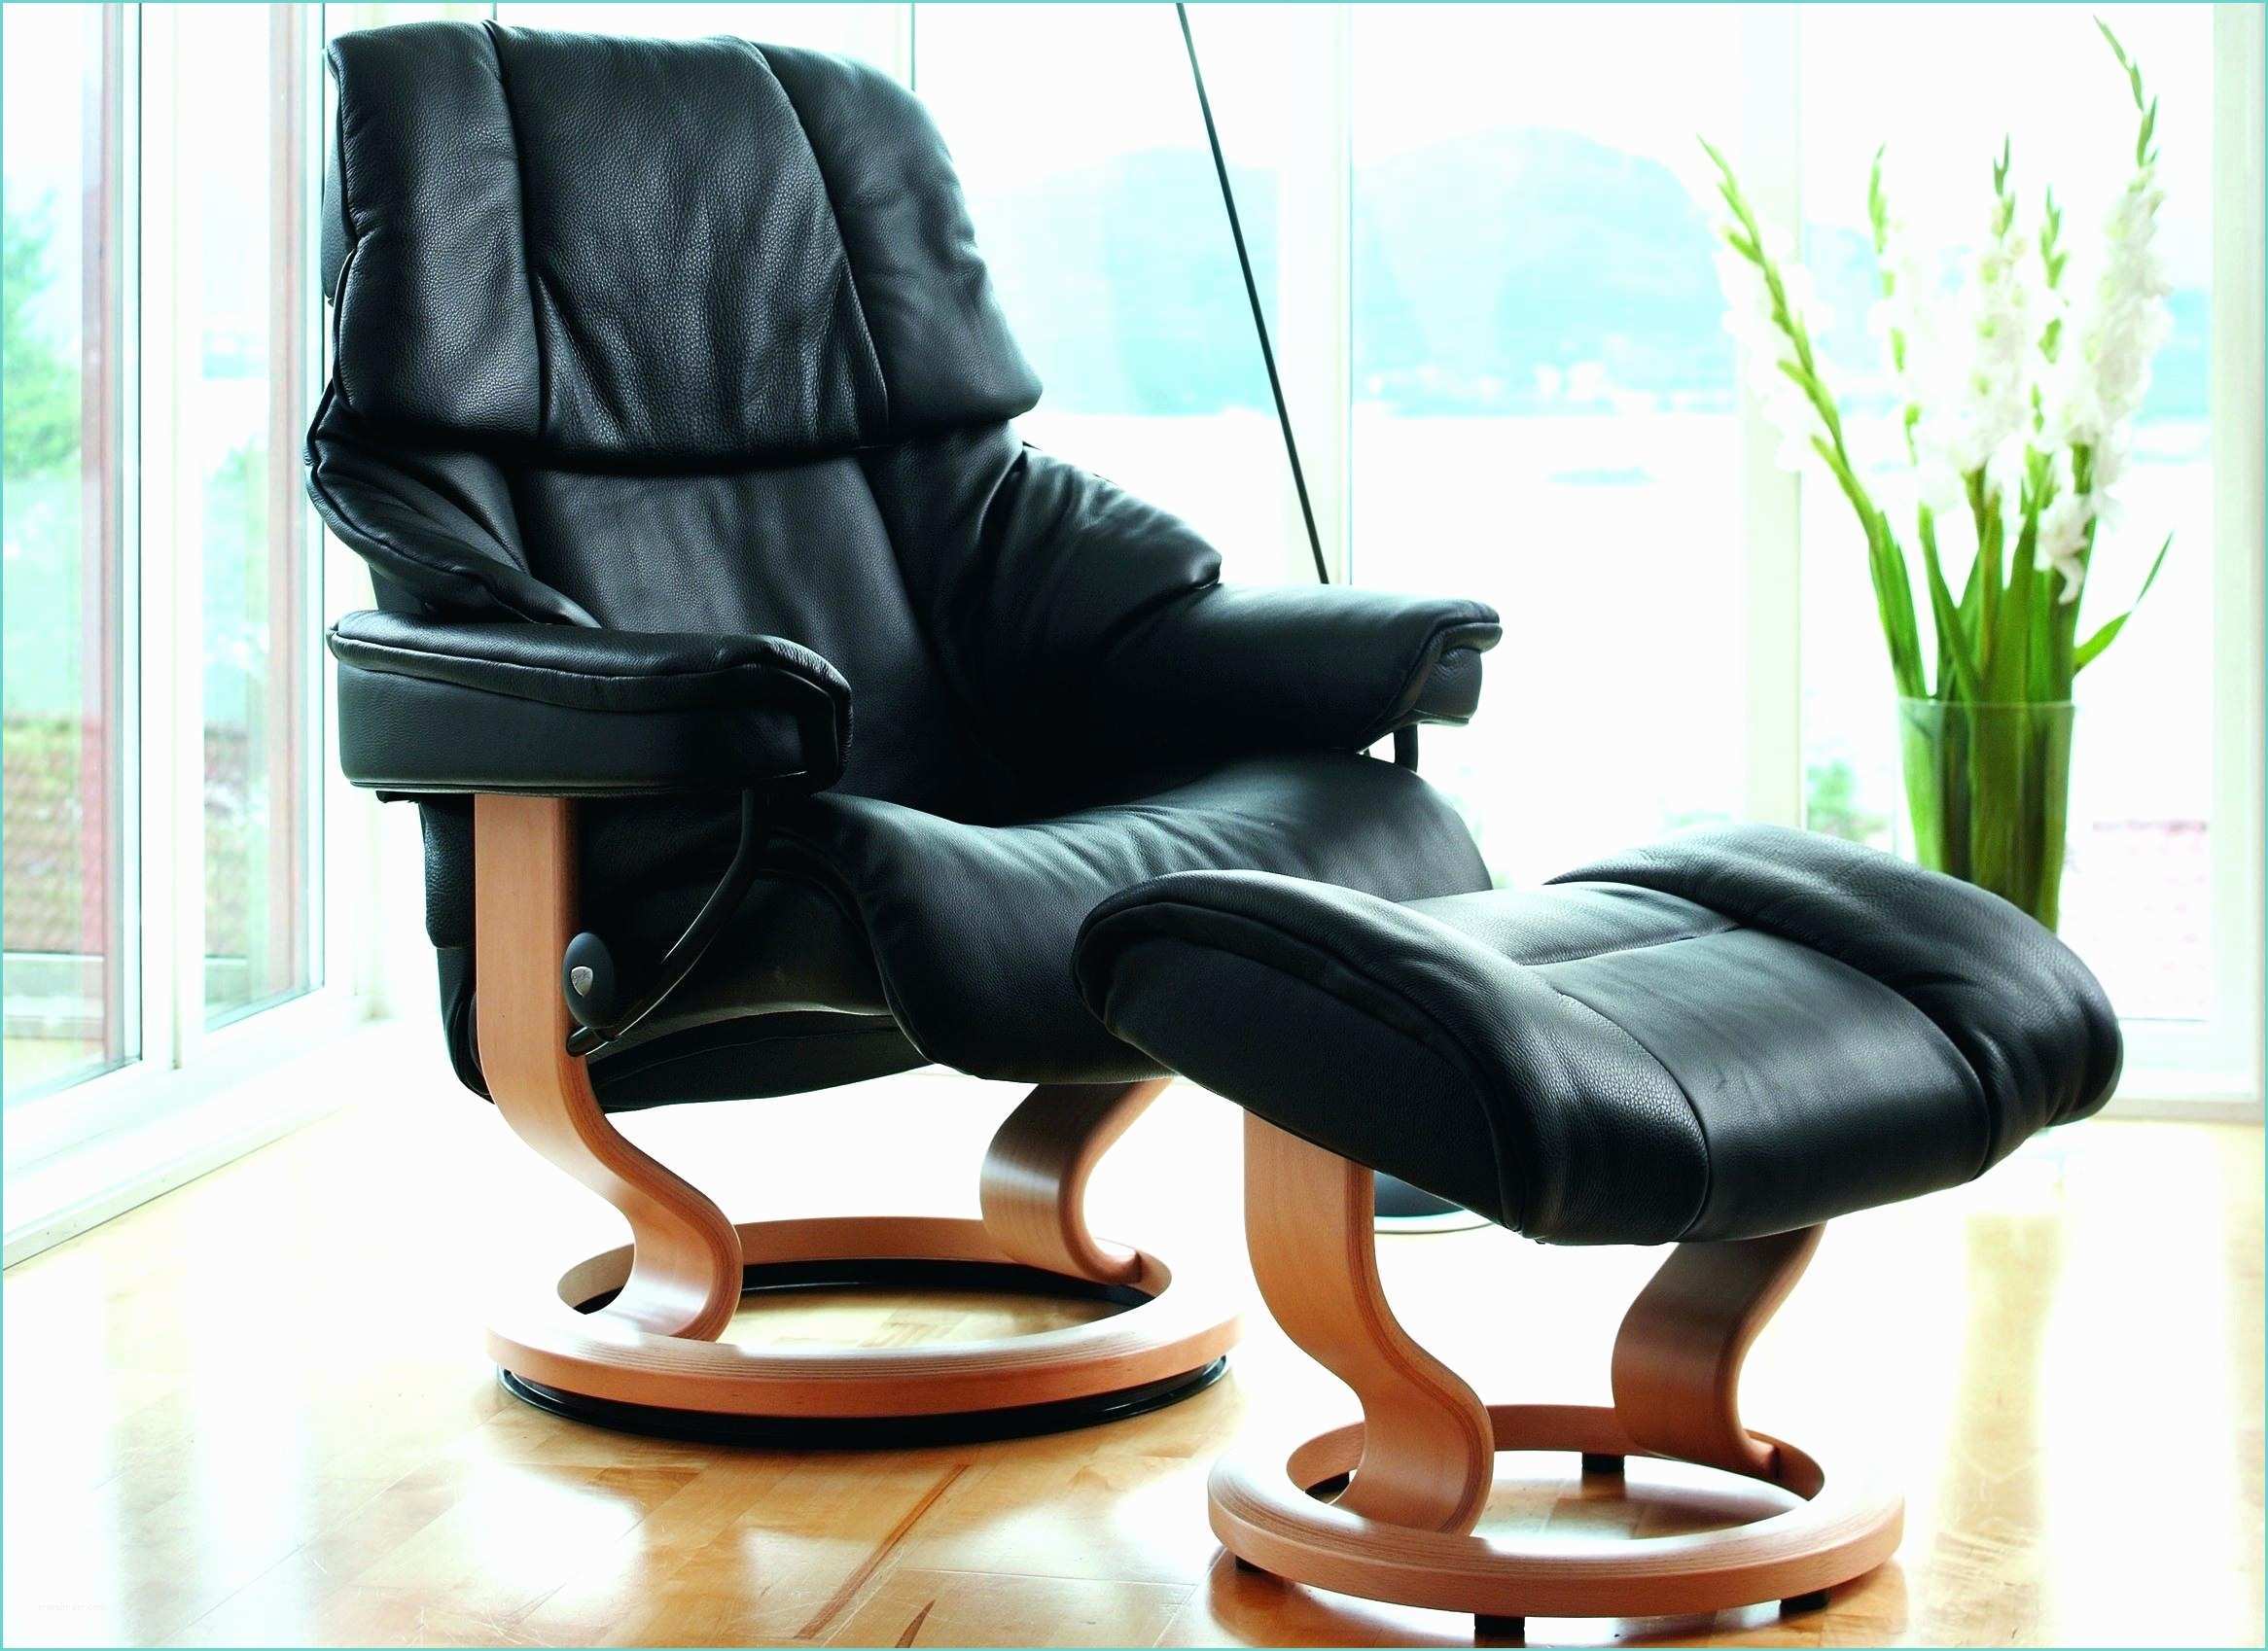 Stressless Magic Chair Review Stressless Chair Excellent Ekornes Stressless Chairs Grey